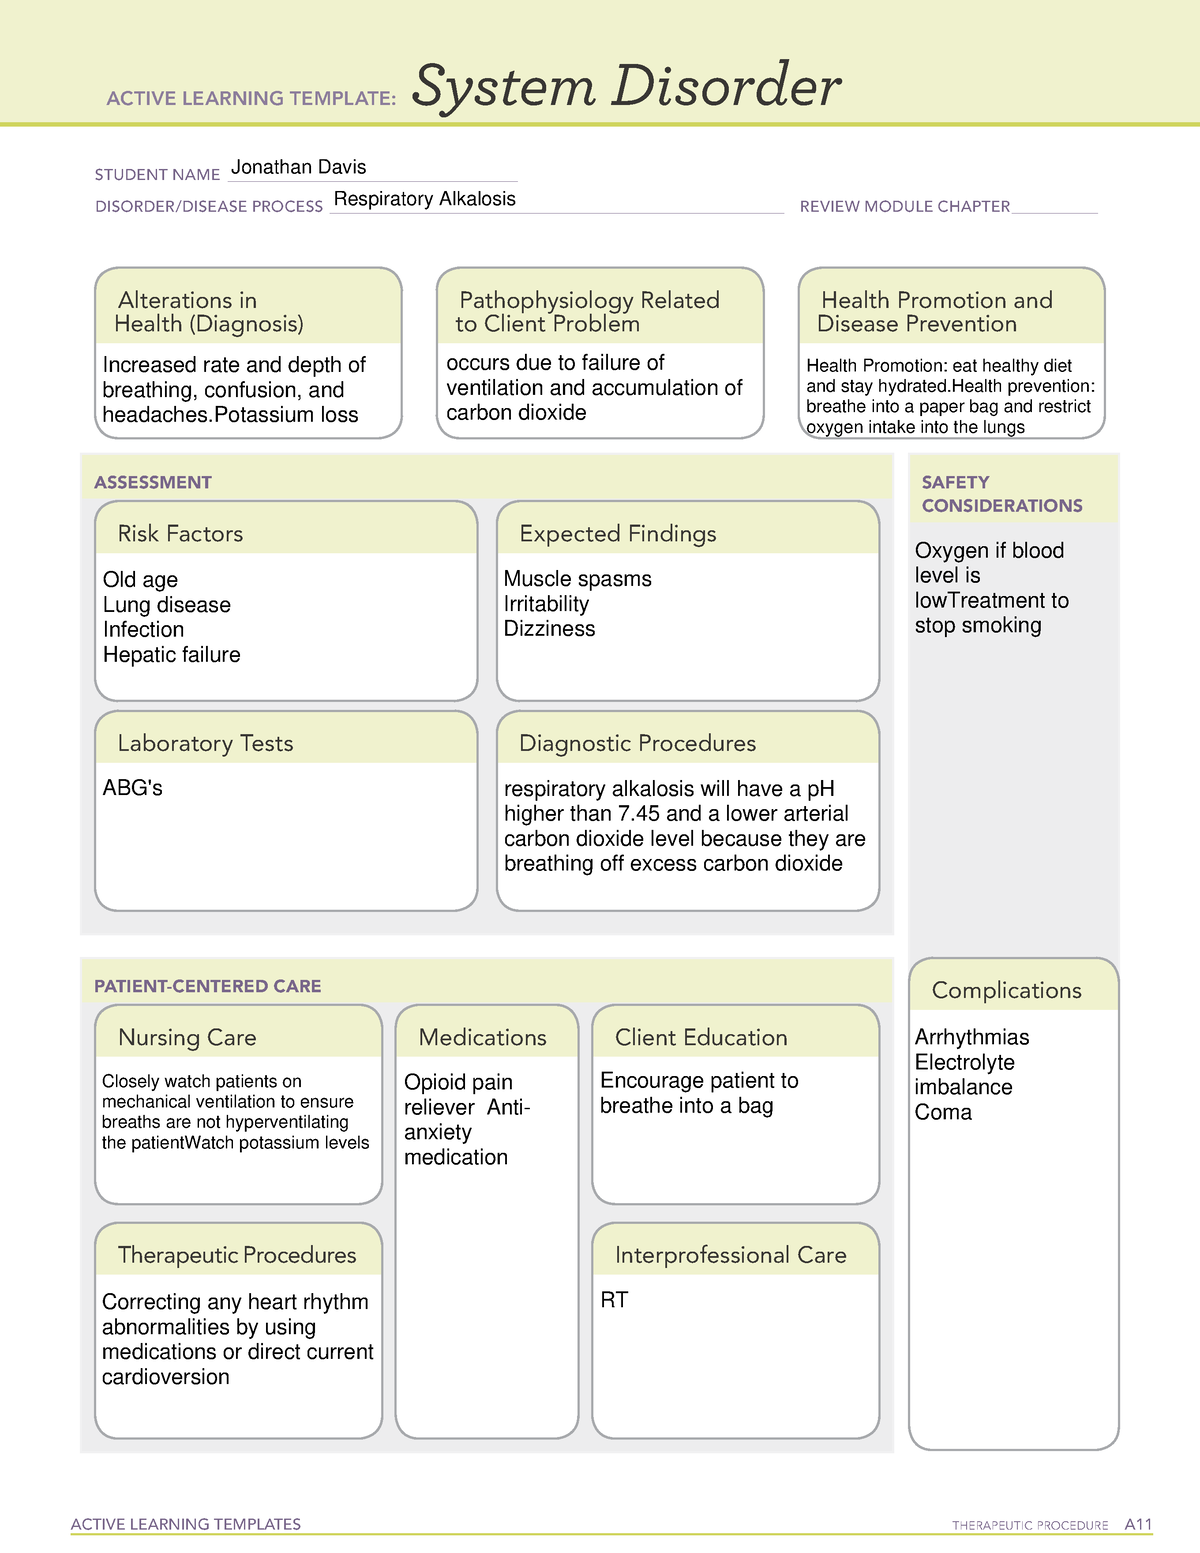 system-disorder-copd-ati-template-active-learning-templates-images